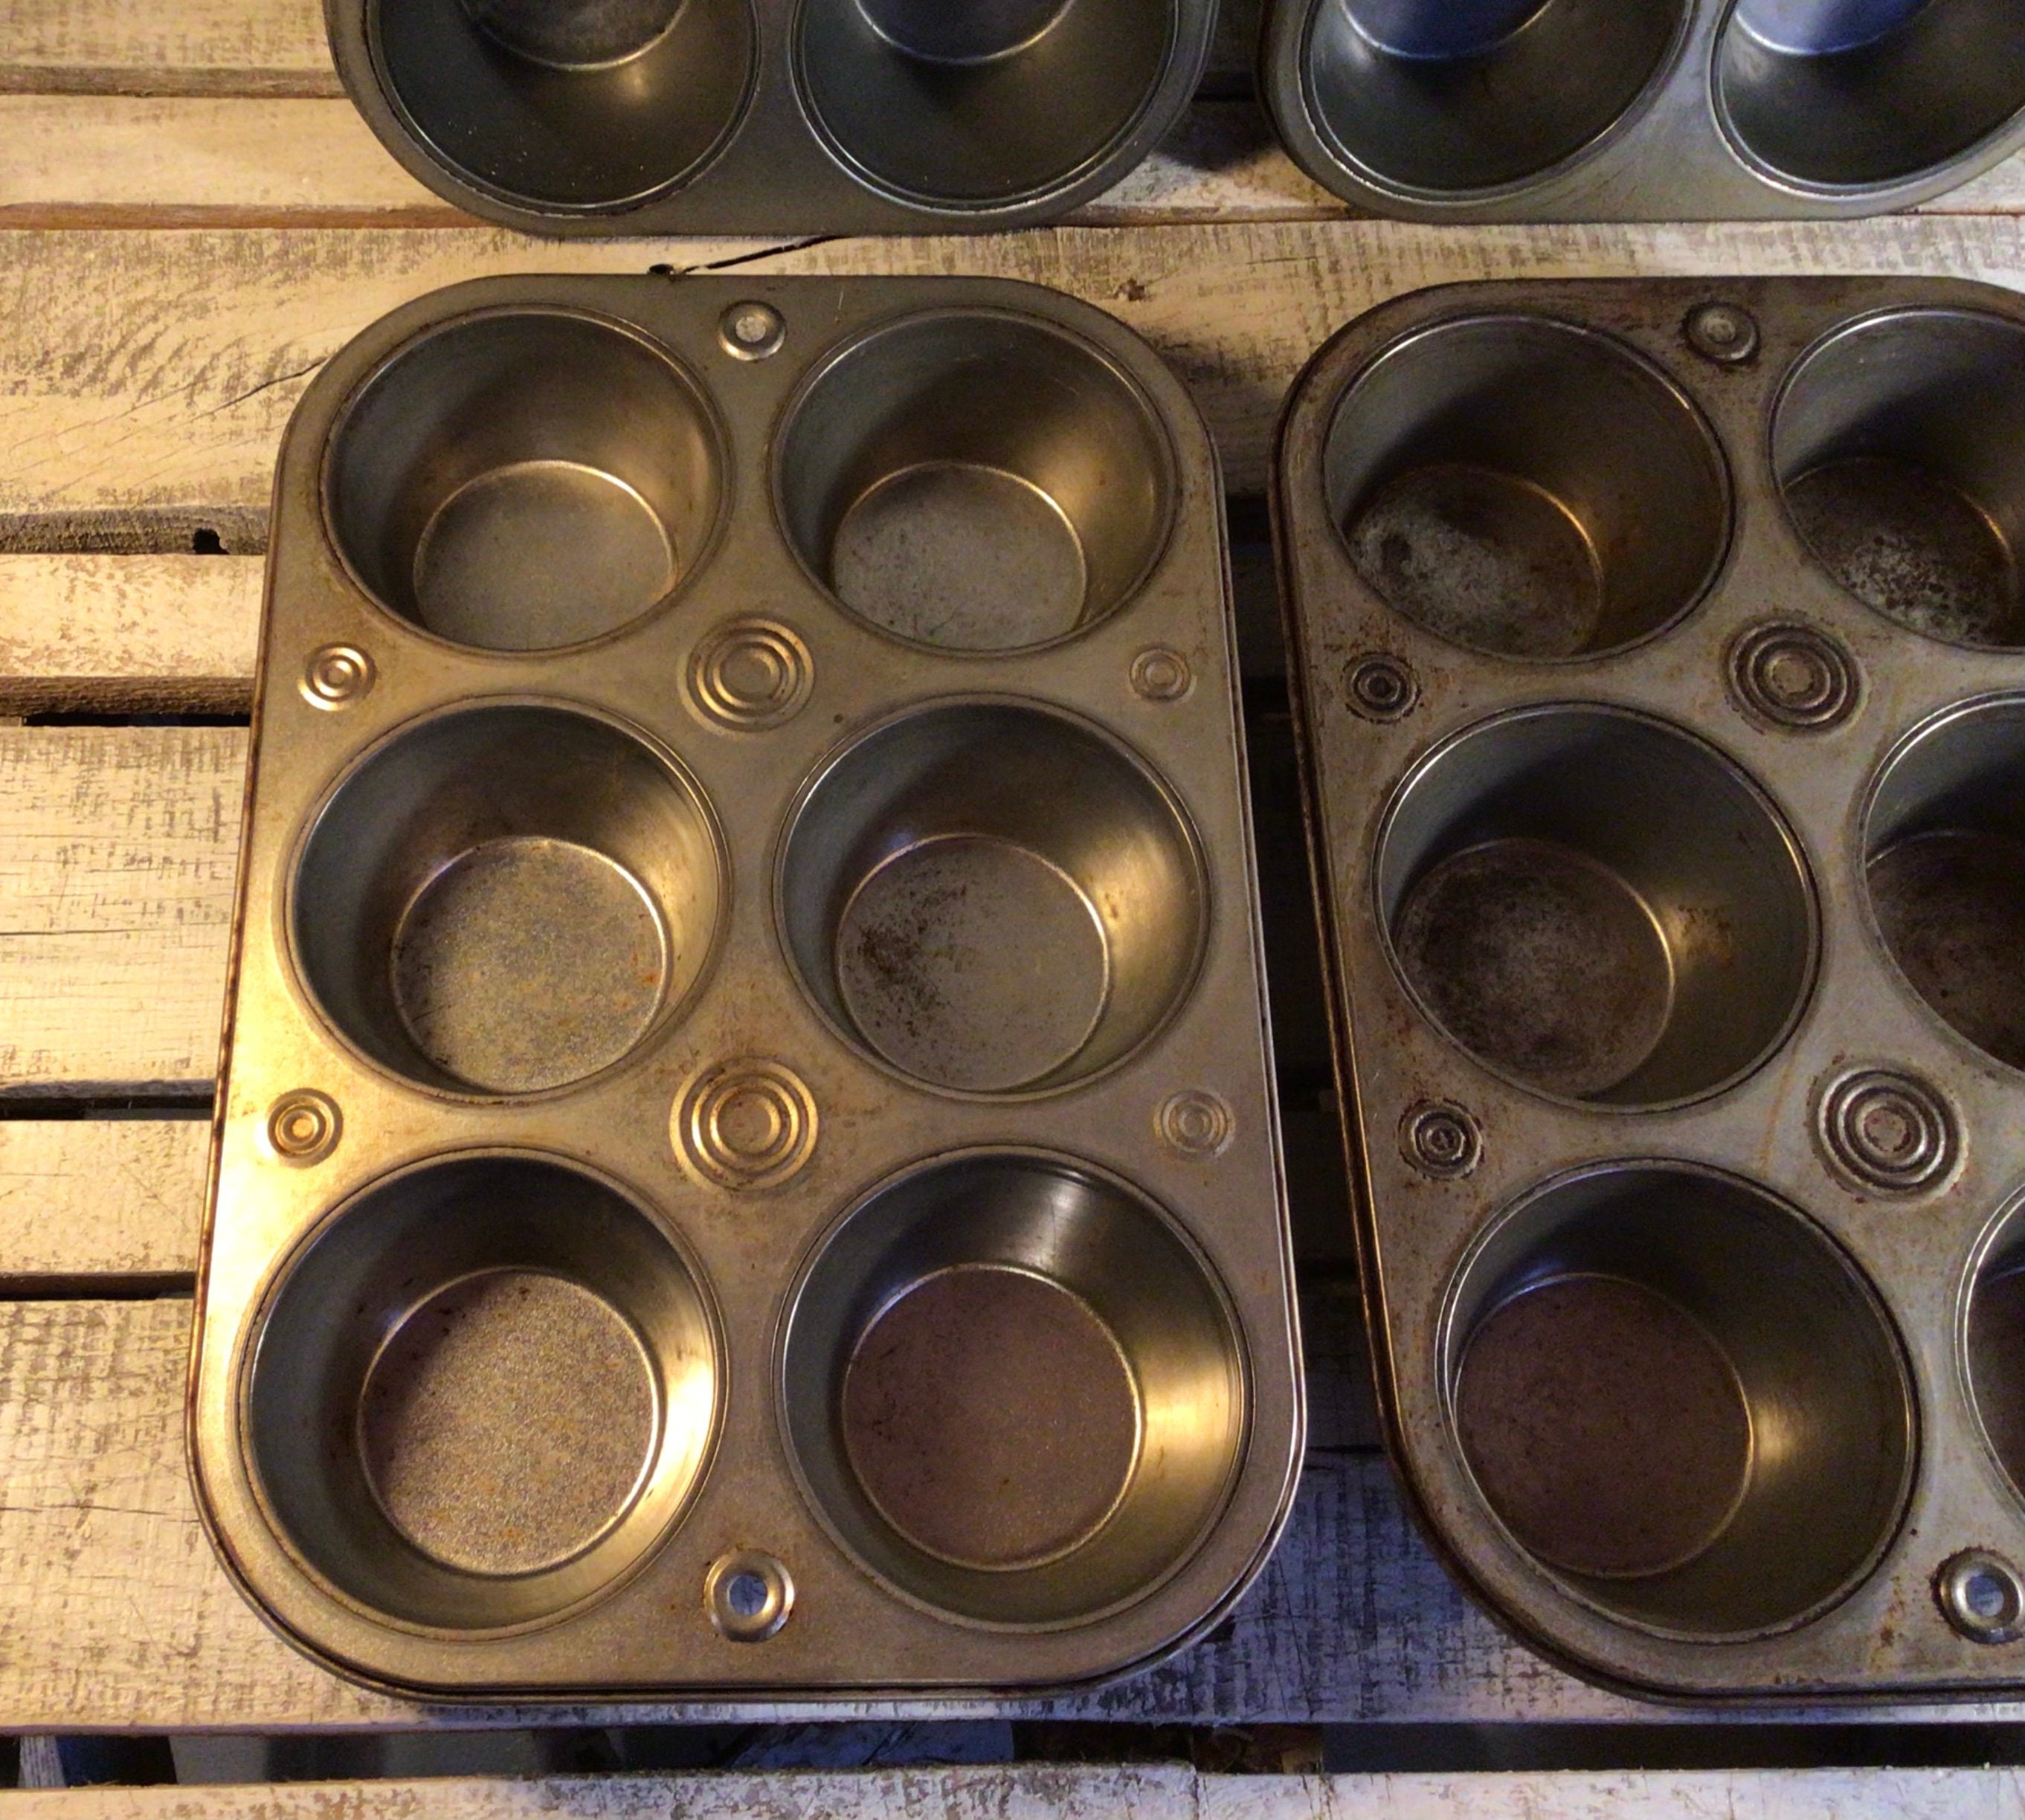 Vintage 6 Section Muffin Tins for Large 3 1/2 Muffins or Cupcakes, Large  Muffin Pans -  Hong Kong